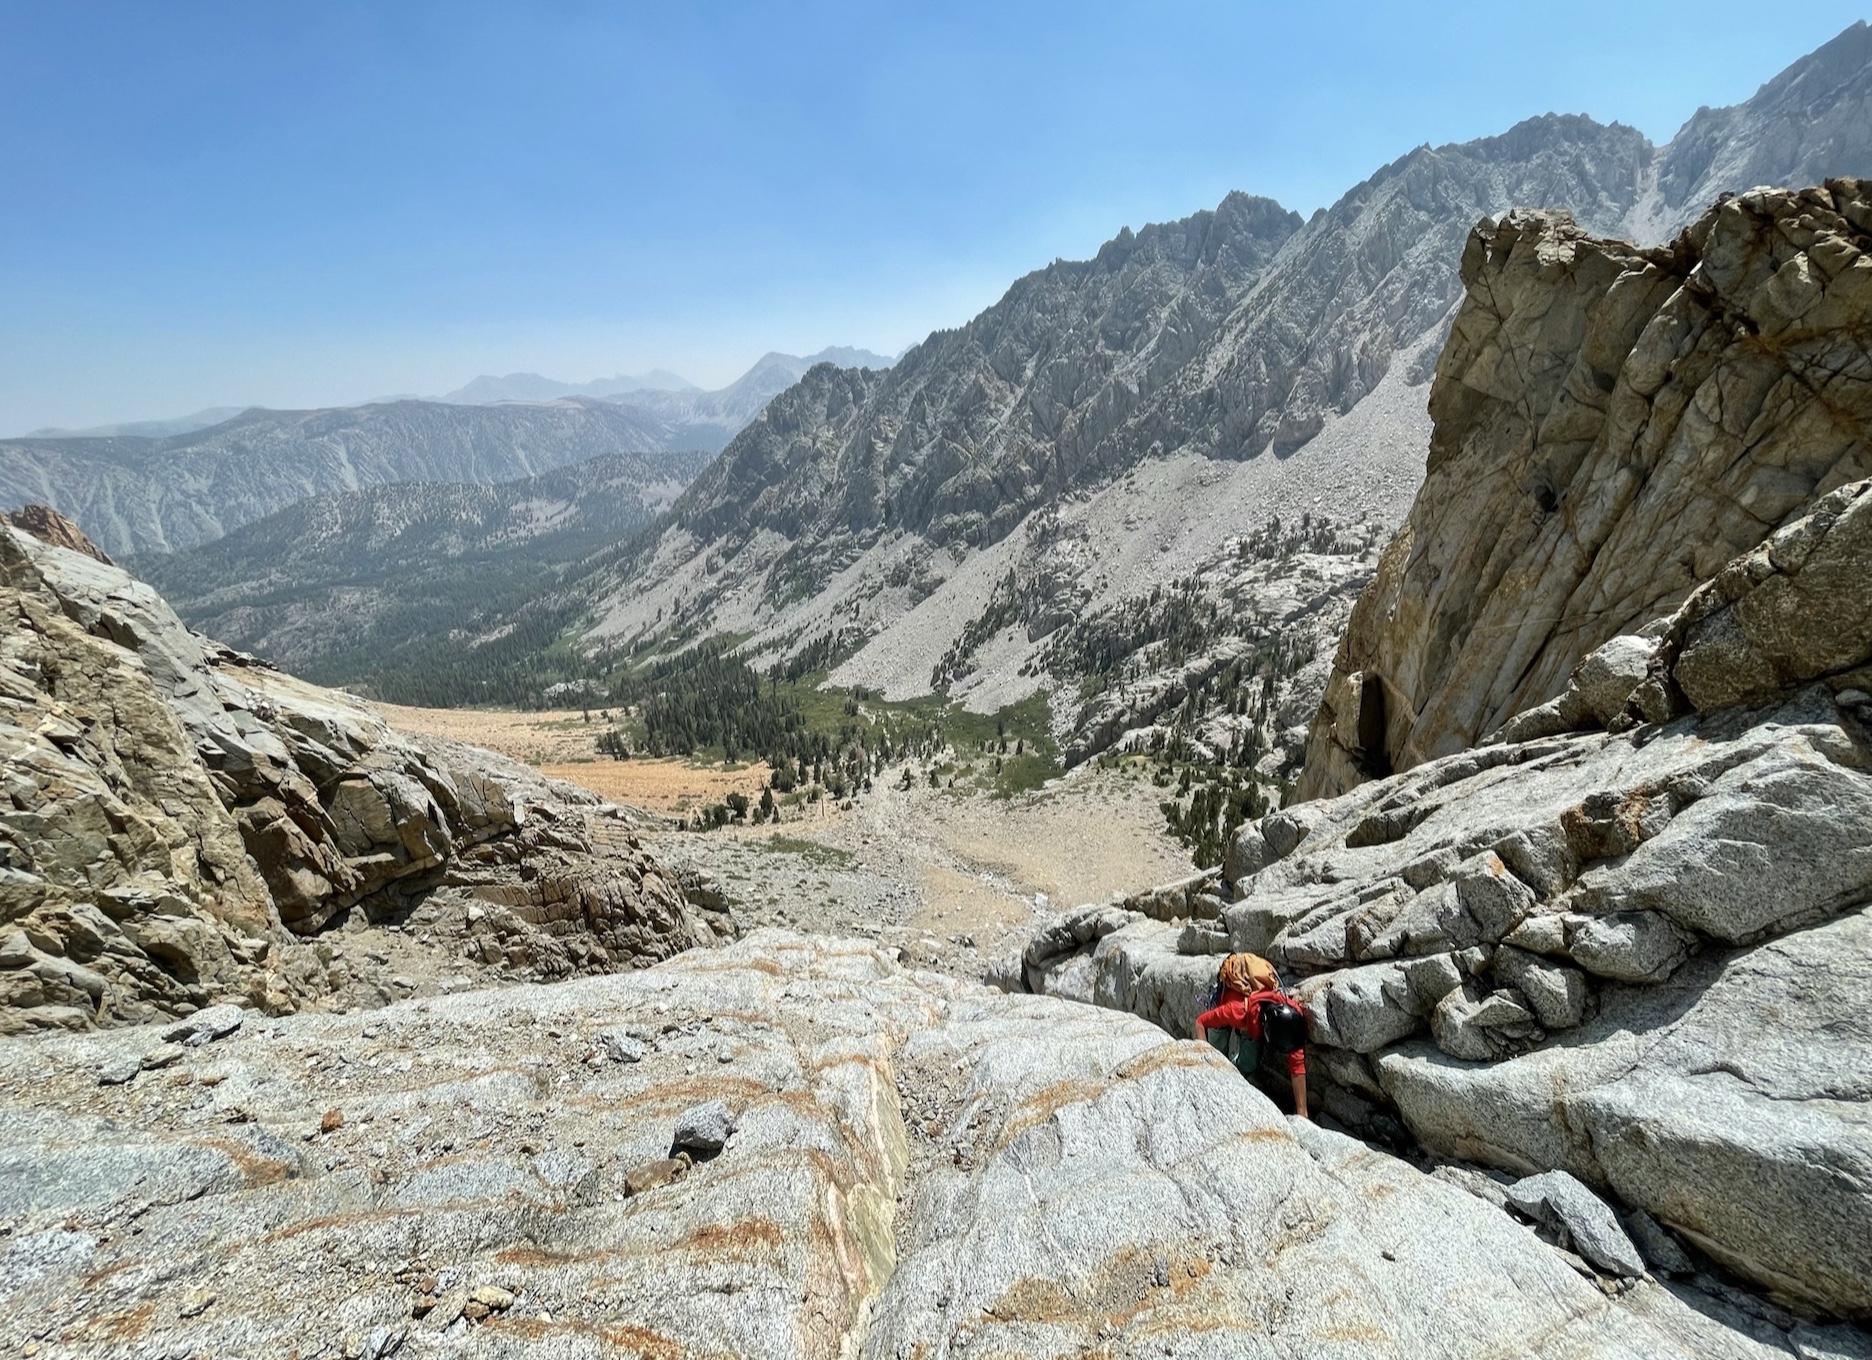 Coming up a shallow section, looking down at Paiute Pass Trail